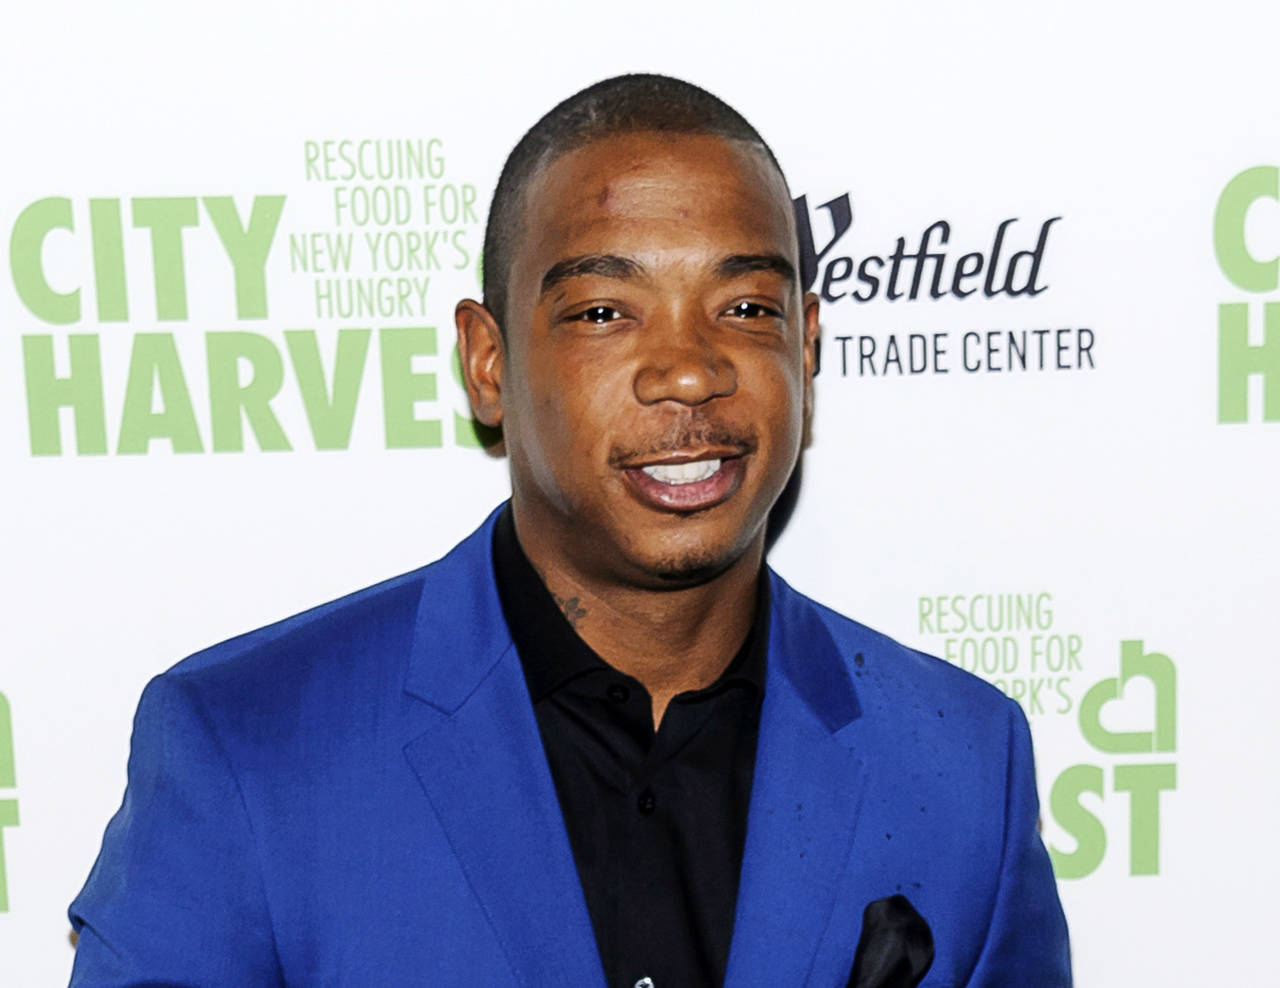 In this April 25 photo, Ja Rule attends City Harvest’s 23rd Annual Gala, “An Evening of Practical Magic” in New York. Organizers of the Fyre Festival in the Bahamas, produced by a partnership that includes rapper Ja Rule, have canceled the weekend event at the last minute Friday after many people had already arrived and spent thousands of dollars on tickets and travel. (Photo by Christopher Smith/Invision/AP, File)